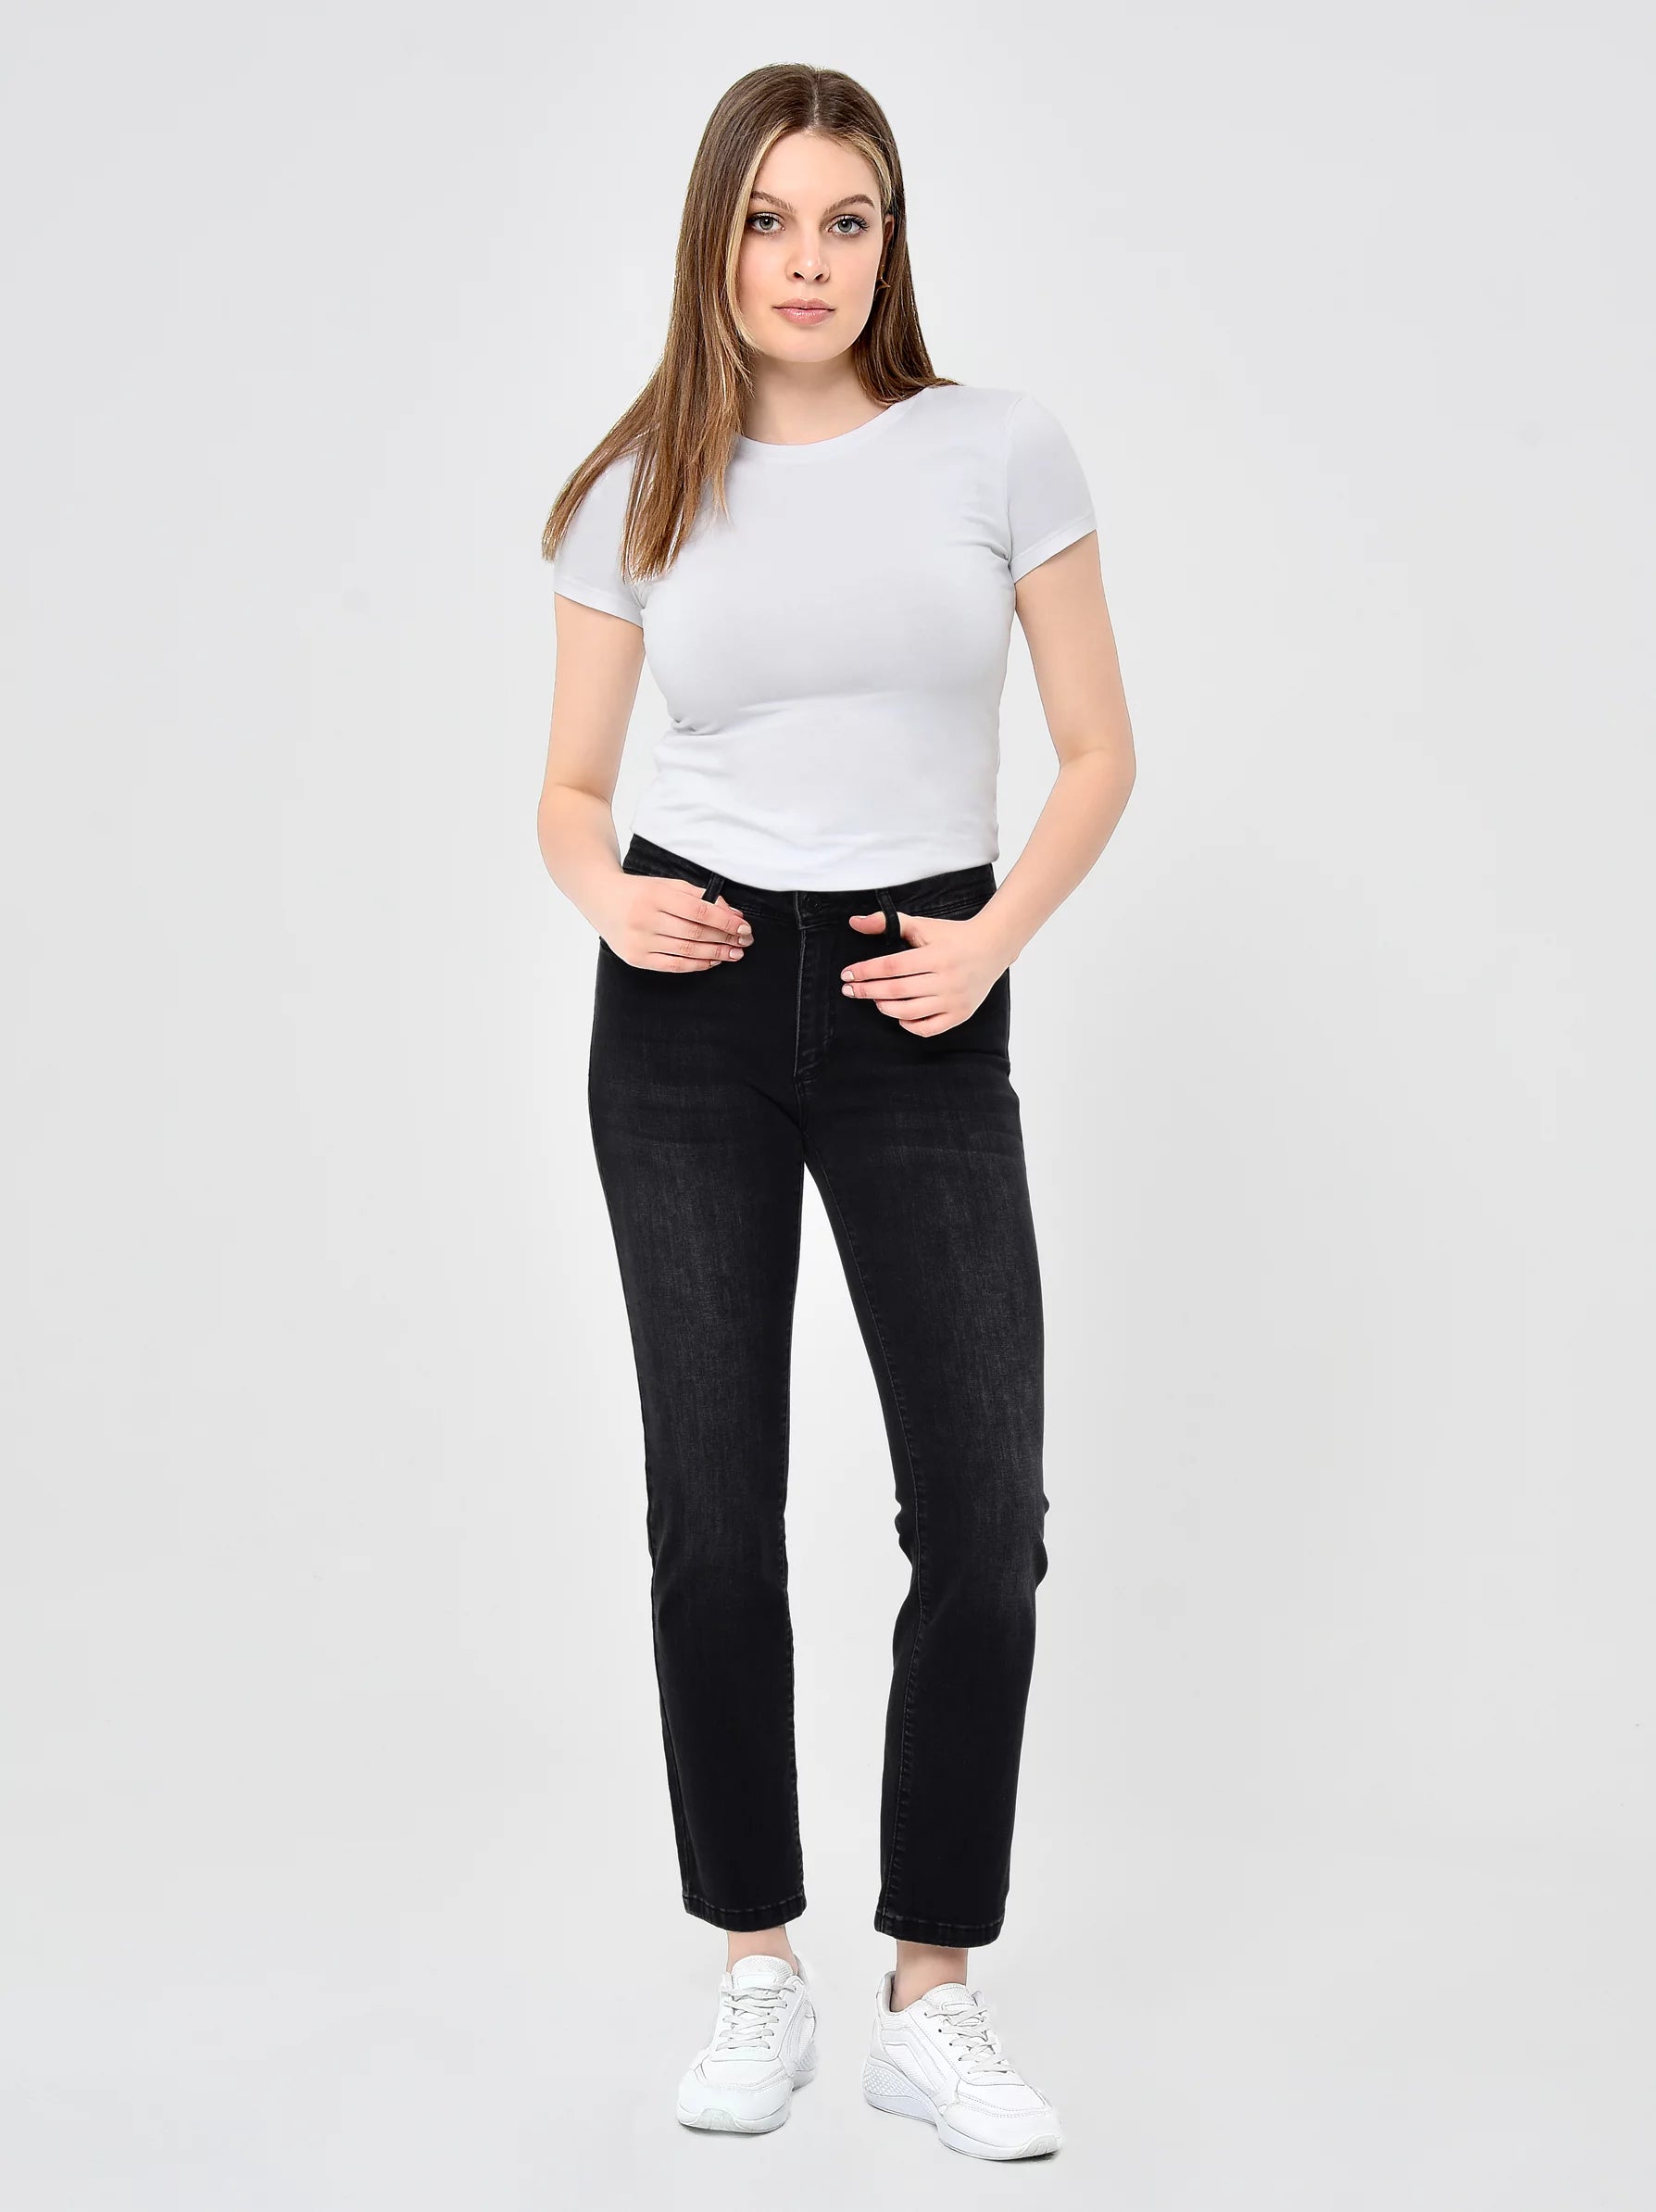 What Jeans to Wear if You Have a Belly? – Modora UK